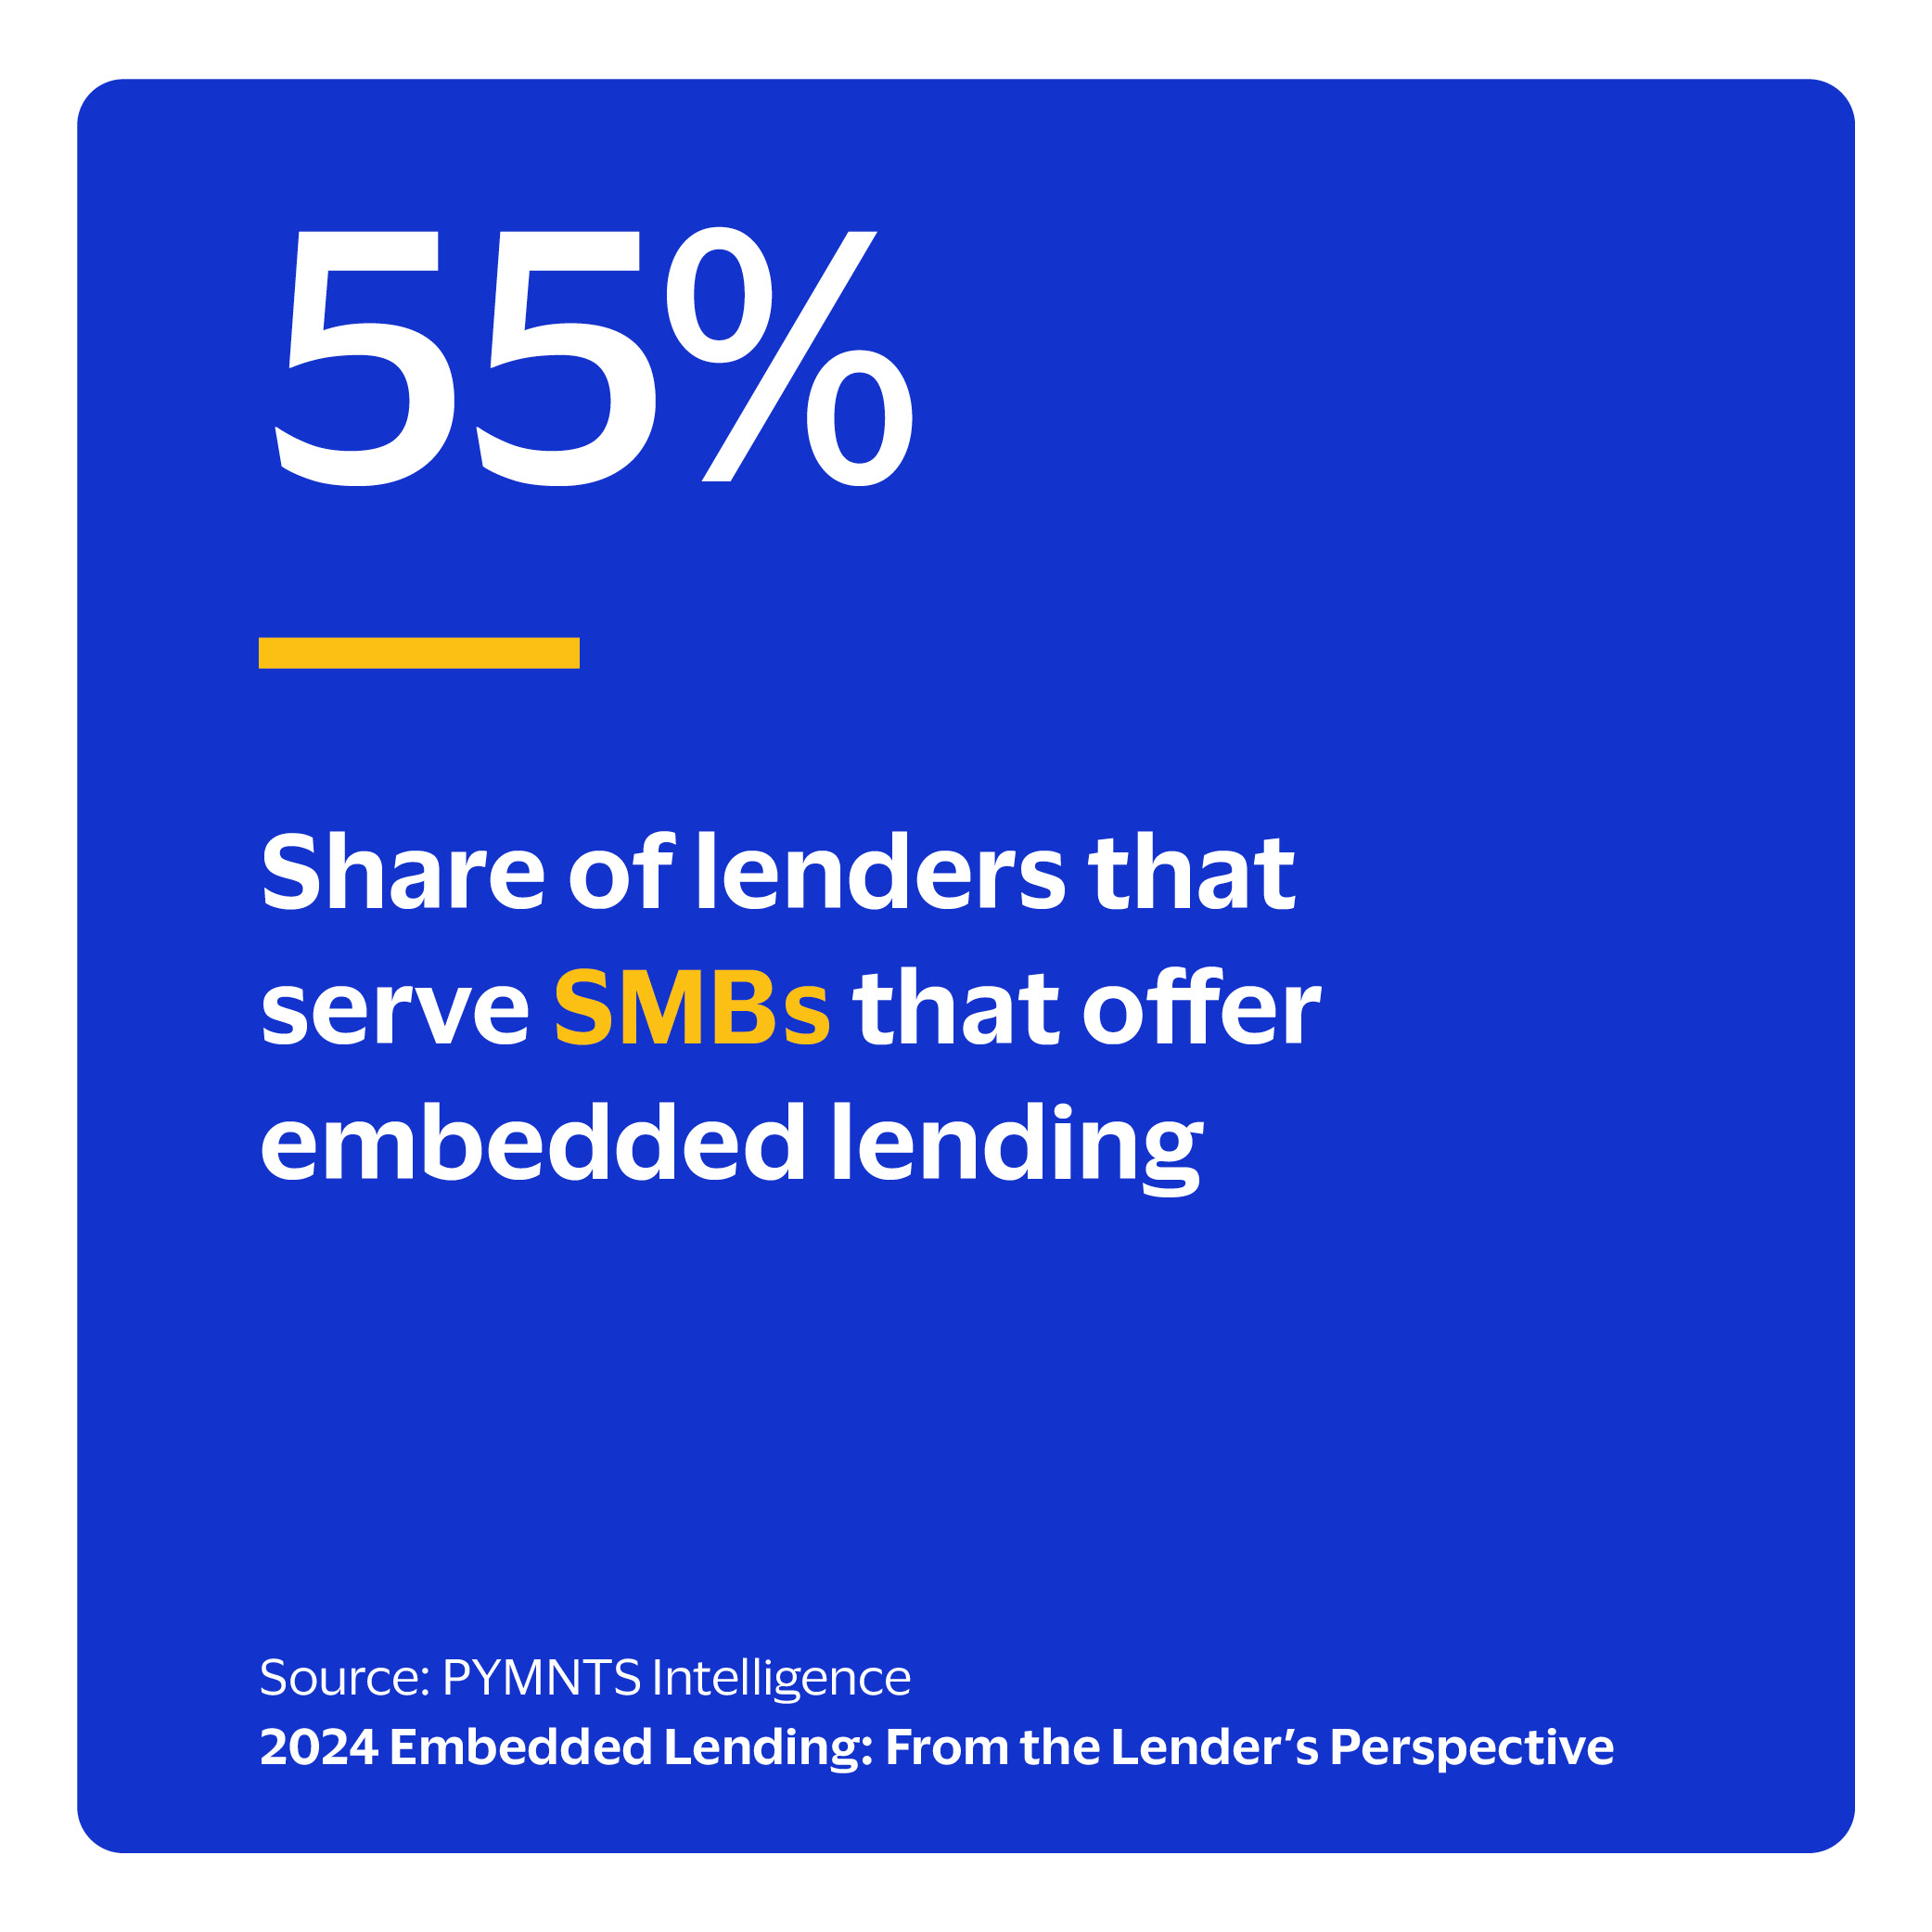 55%: Share of lenders that serve SMBs that offer embedded lending